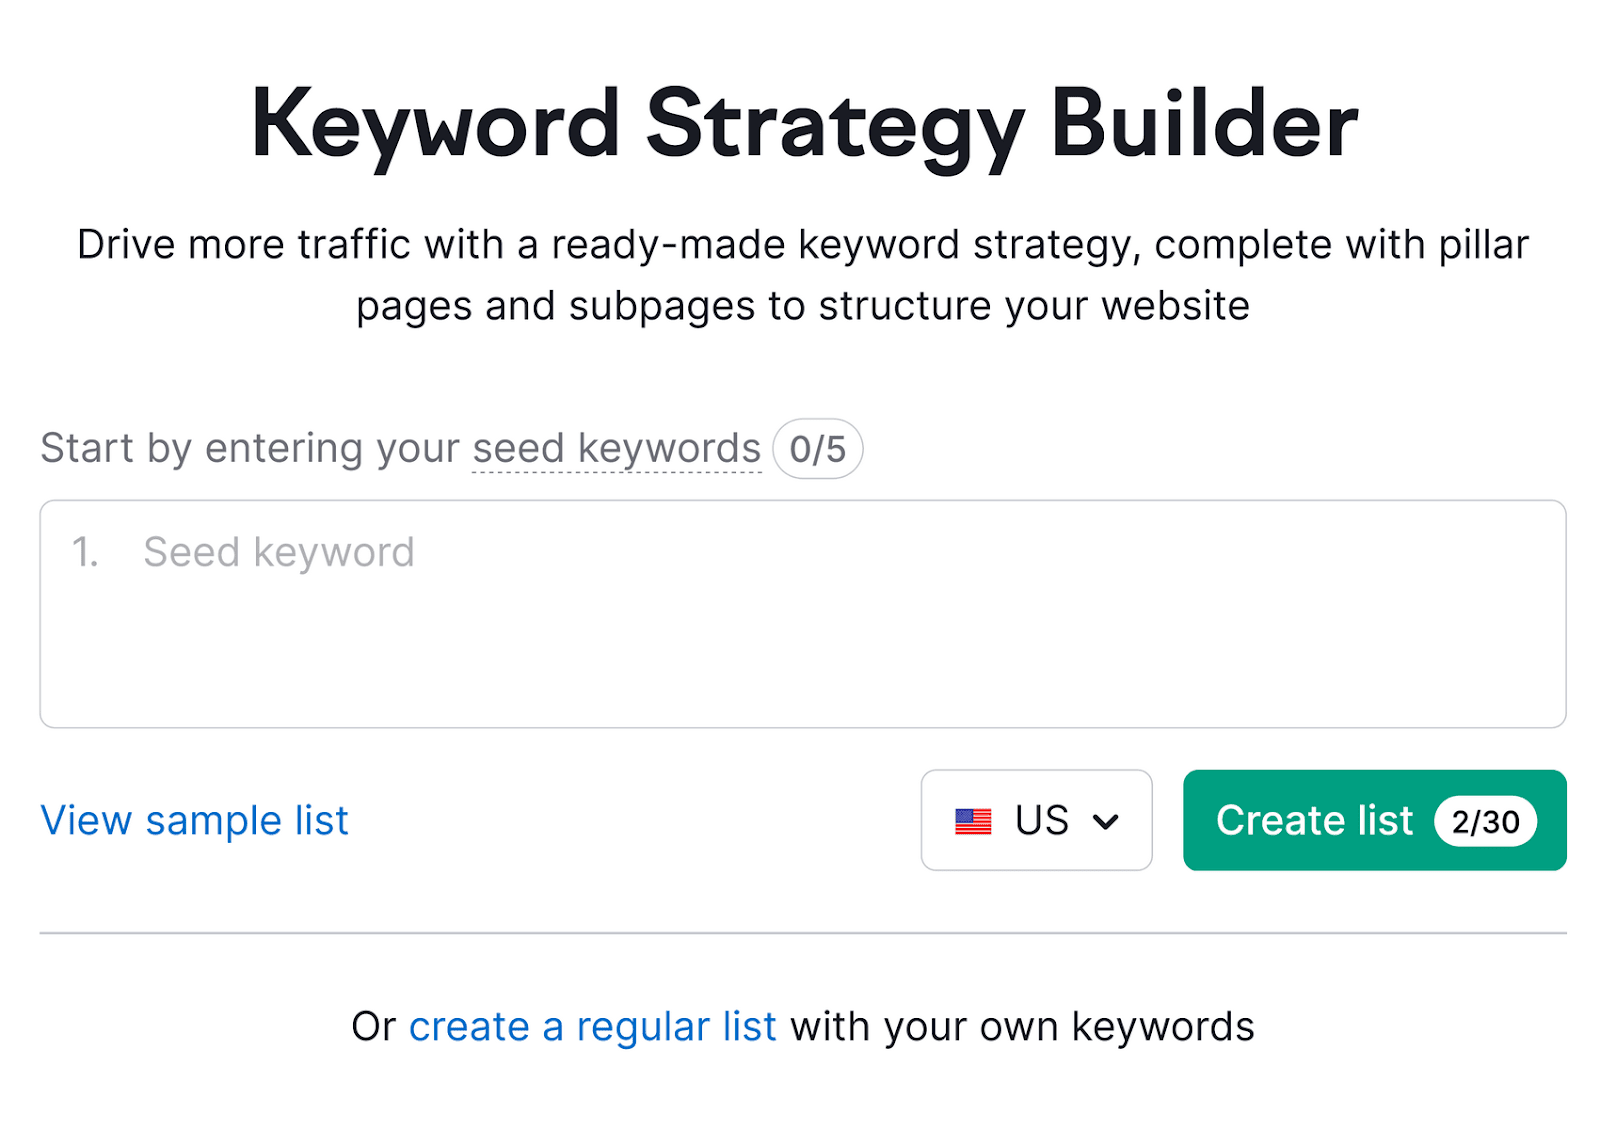 Keyword Strategy Builder with a heading, description for driving traffic using keywords, an input field for keywords, etc.